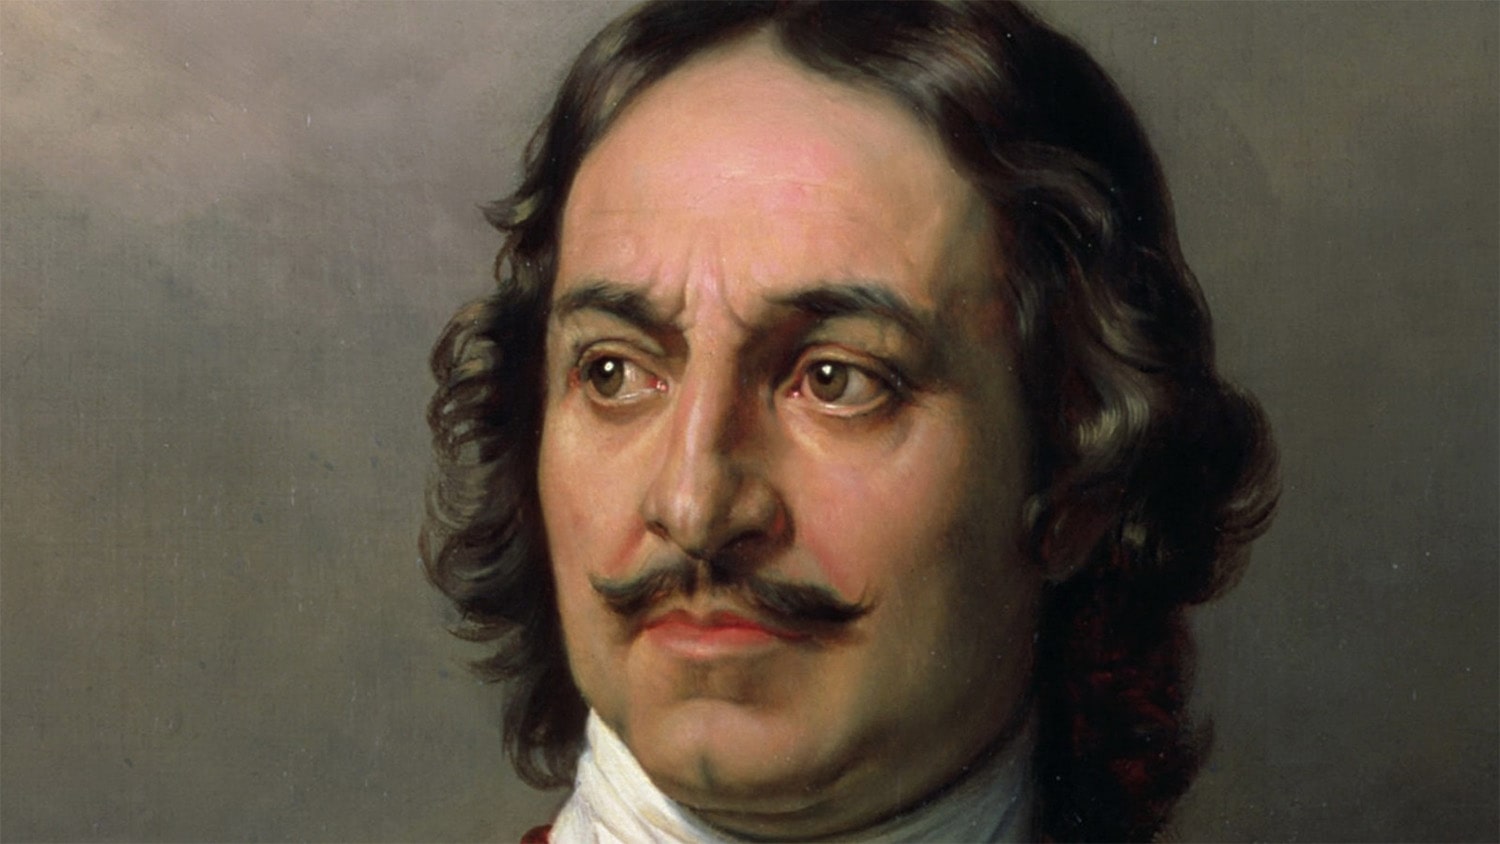 23 interesting facts about Peter the Great